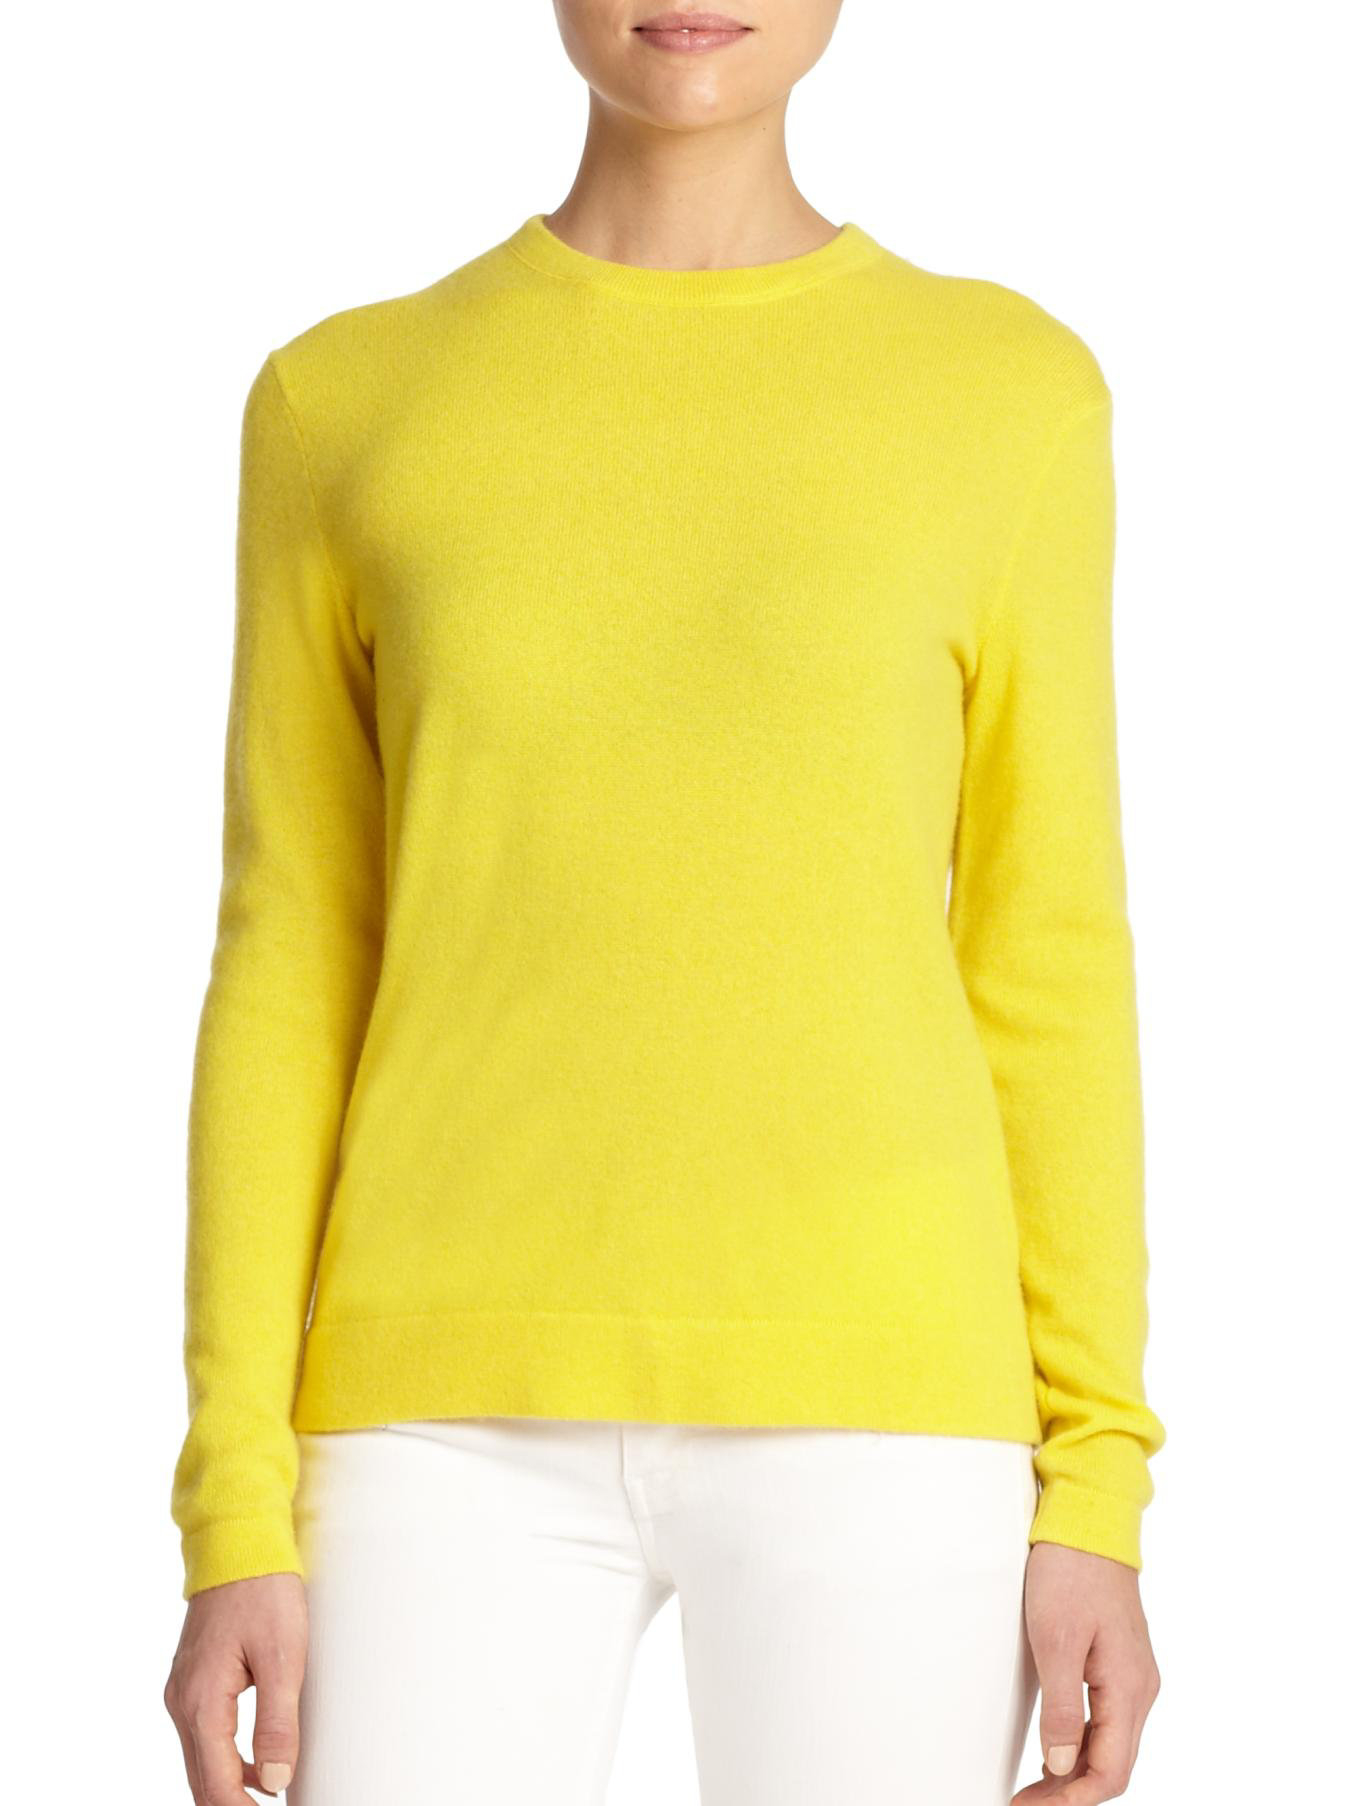 Lyst - Polo Ralph Lauren Cashmere Crewneck Sweater in Yellow